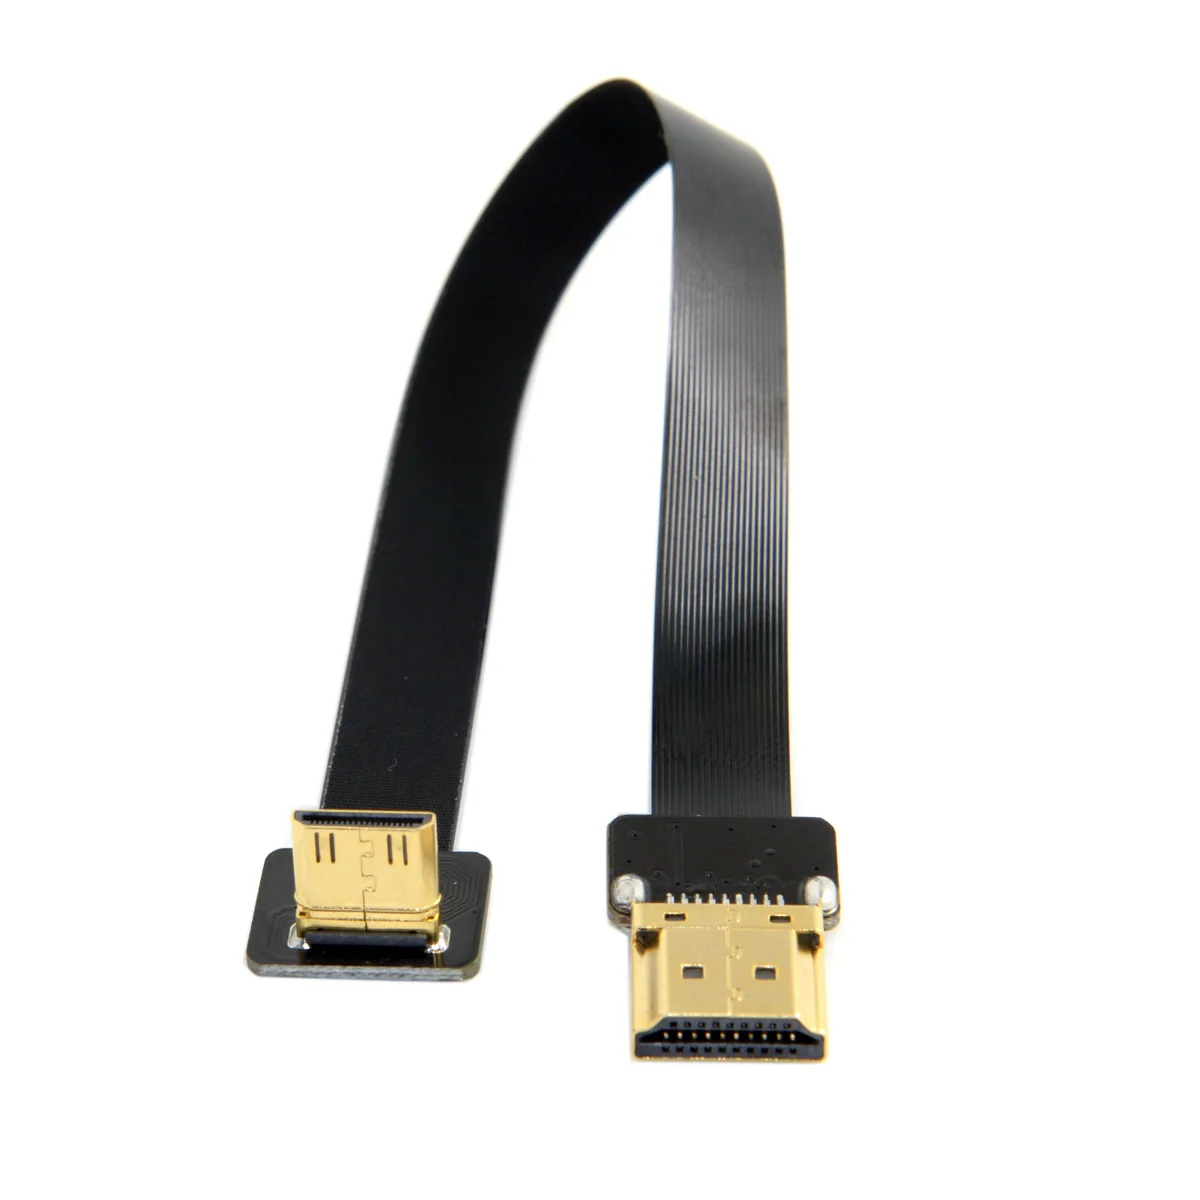 

CYDZ FPV 90 Degree Up Angled FPV Mini HDMI Male to HDMI Male FPC Flat Cable for FPV HDTV Multicopter Aerial Photography 20cm